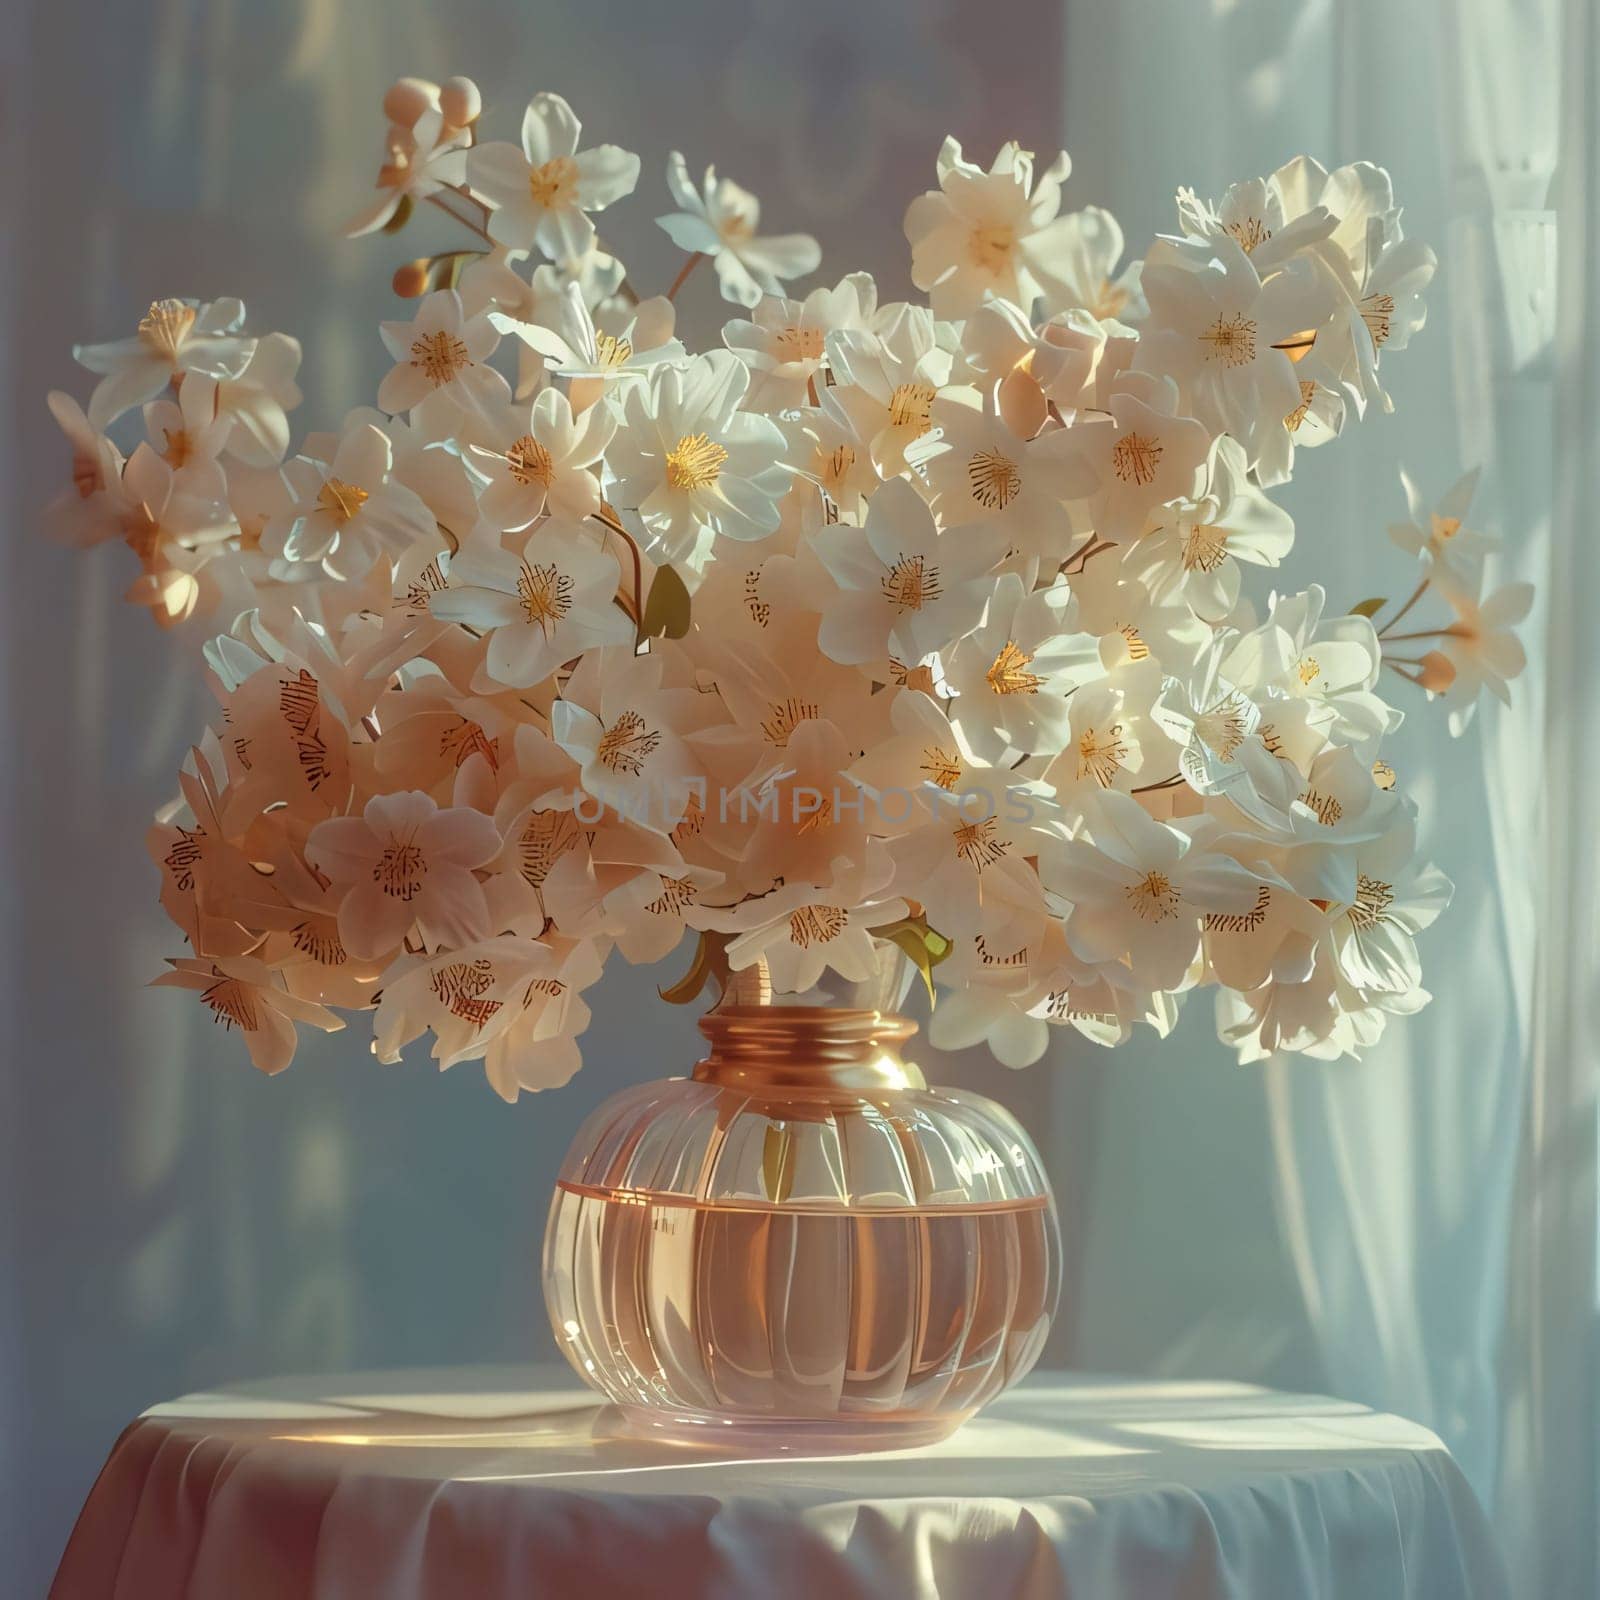 White flowers transparent vase on a bright white background falling sun rays. Flowering flowers, a symbol of spring, new life. A joyful time of nature awakening to life.